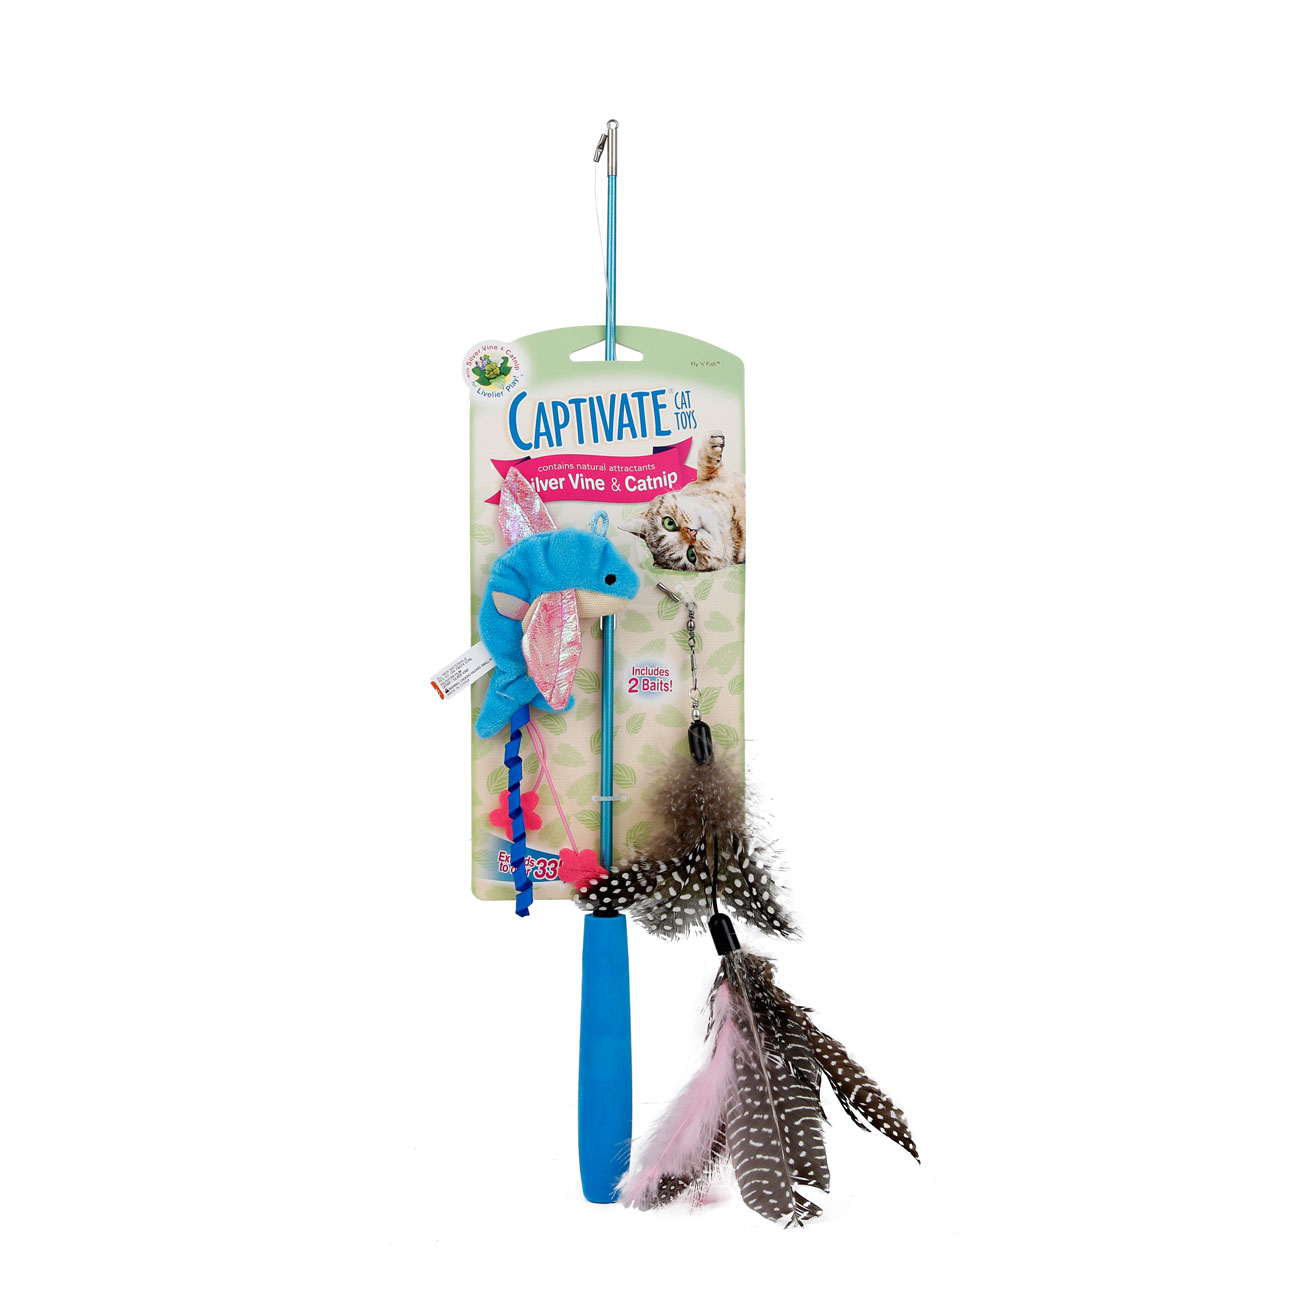 Hartz captivate fish n fly cat toy with silver vine and catnip. Front of package. Hartz SKU#3270011252